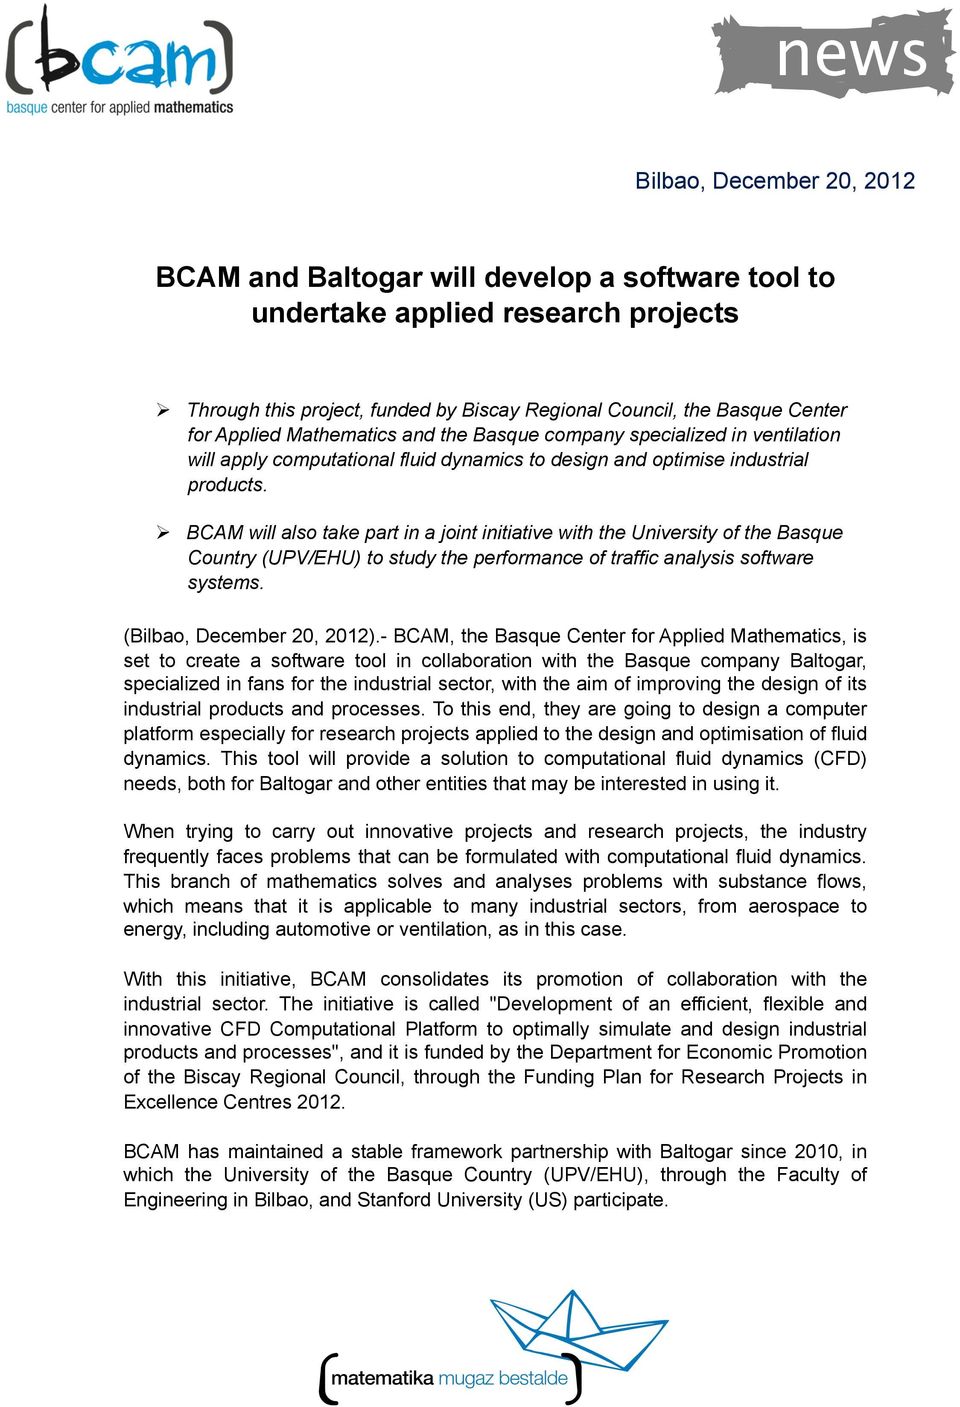 BCAM will also take part in a joint initiative with the University of the Basque Country (UPV/EHU) to study the performance of traffic analysis software systems. (Bilbao, December 20, 2012).